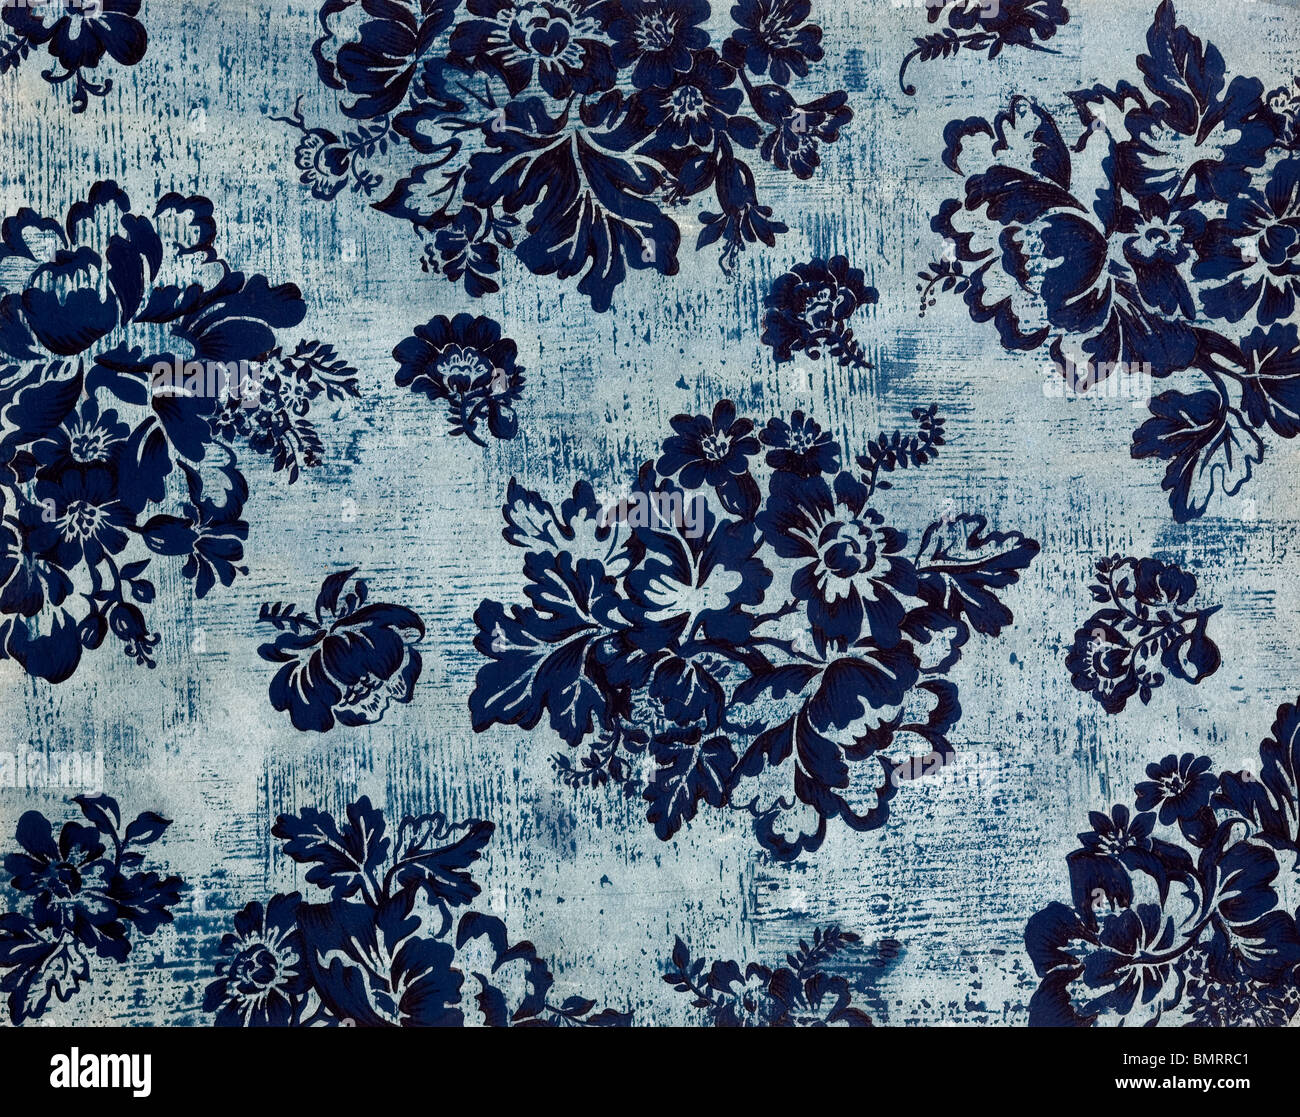 Indigo wallpaper design - photograph of painting (property released) Stock Photo